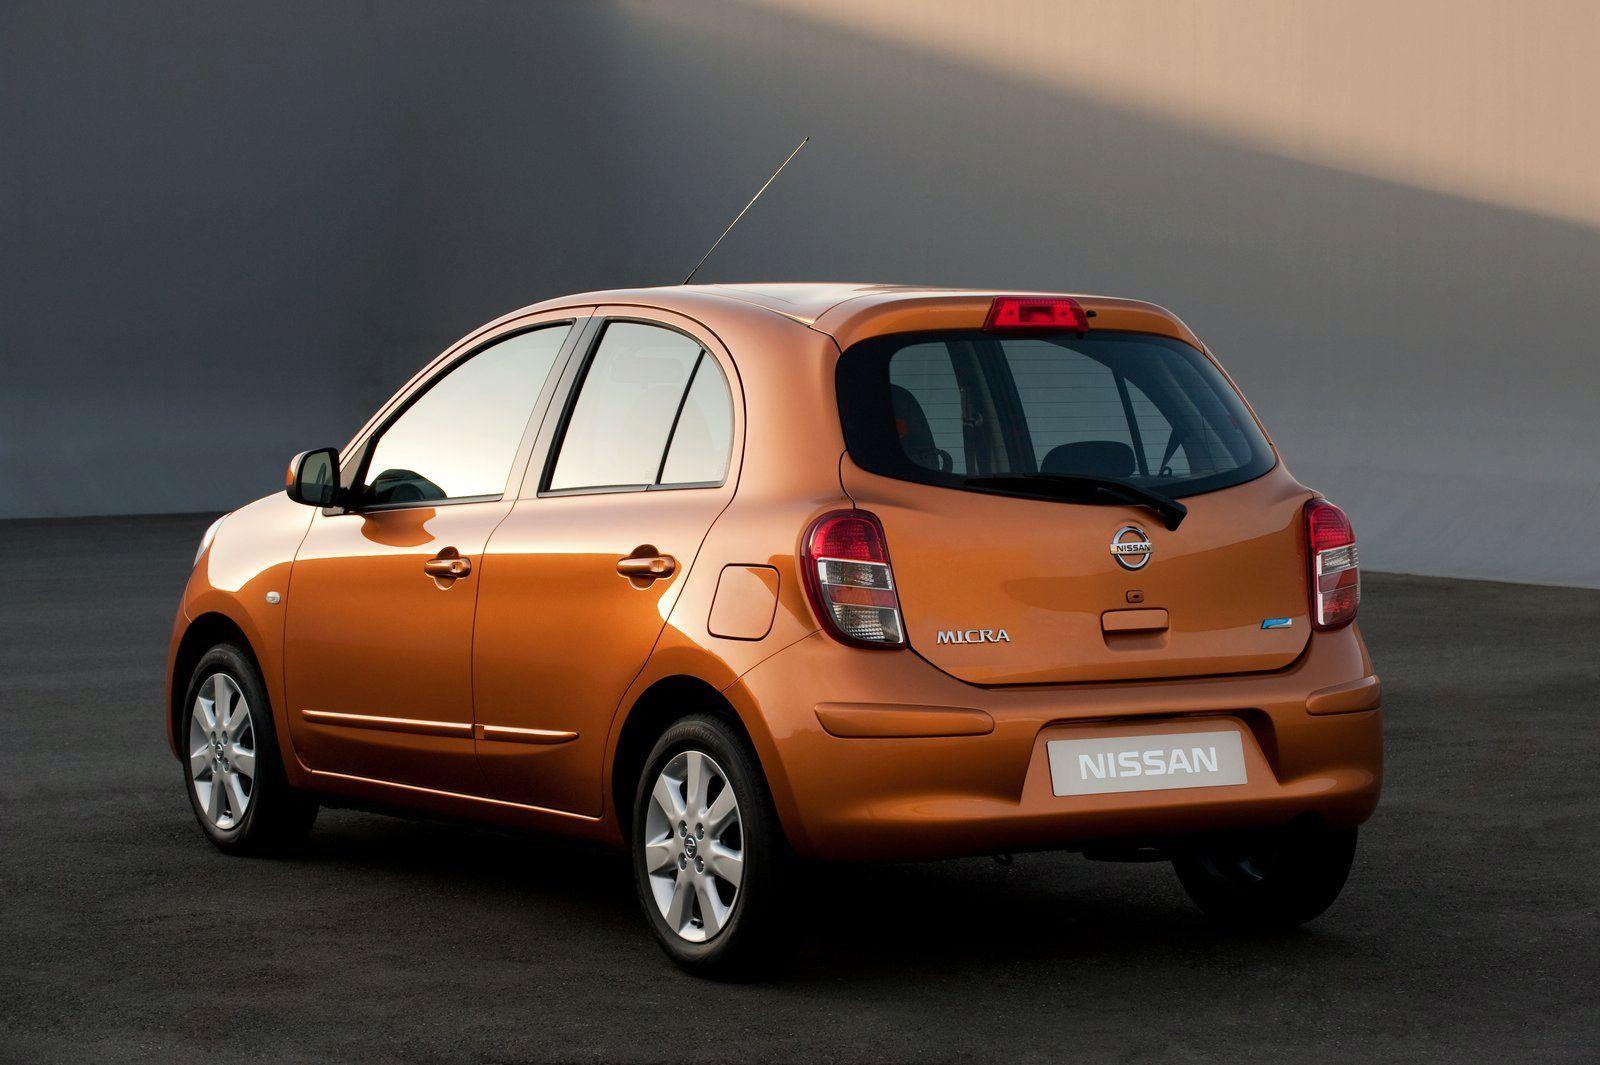 Nissan Micra 2011 photo 57062 picture at high resolution